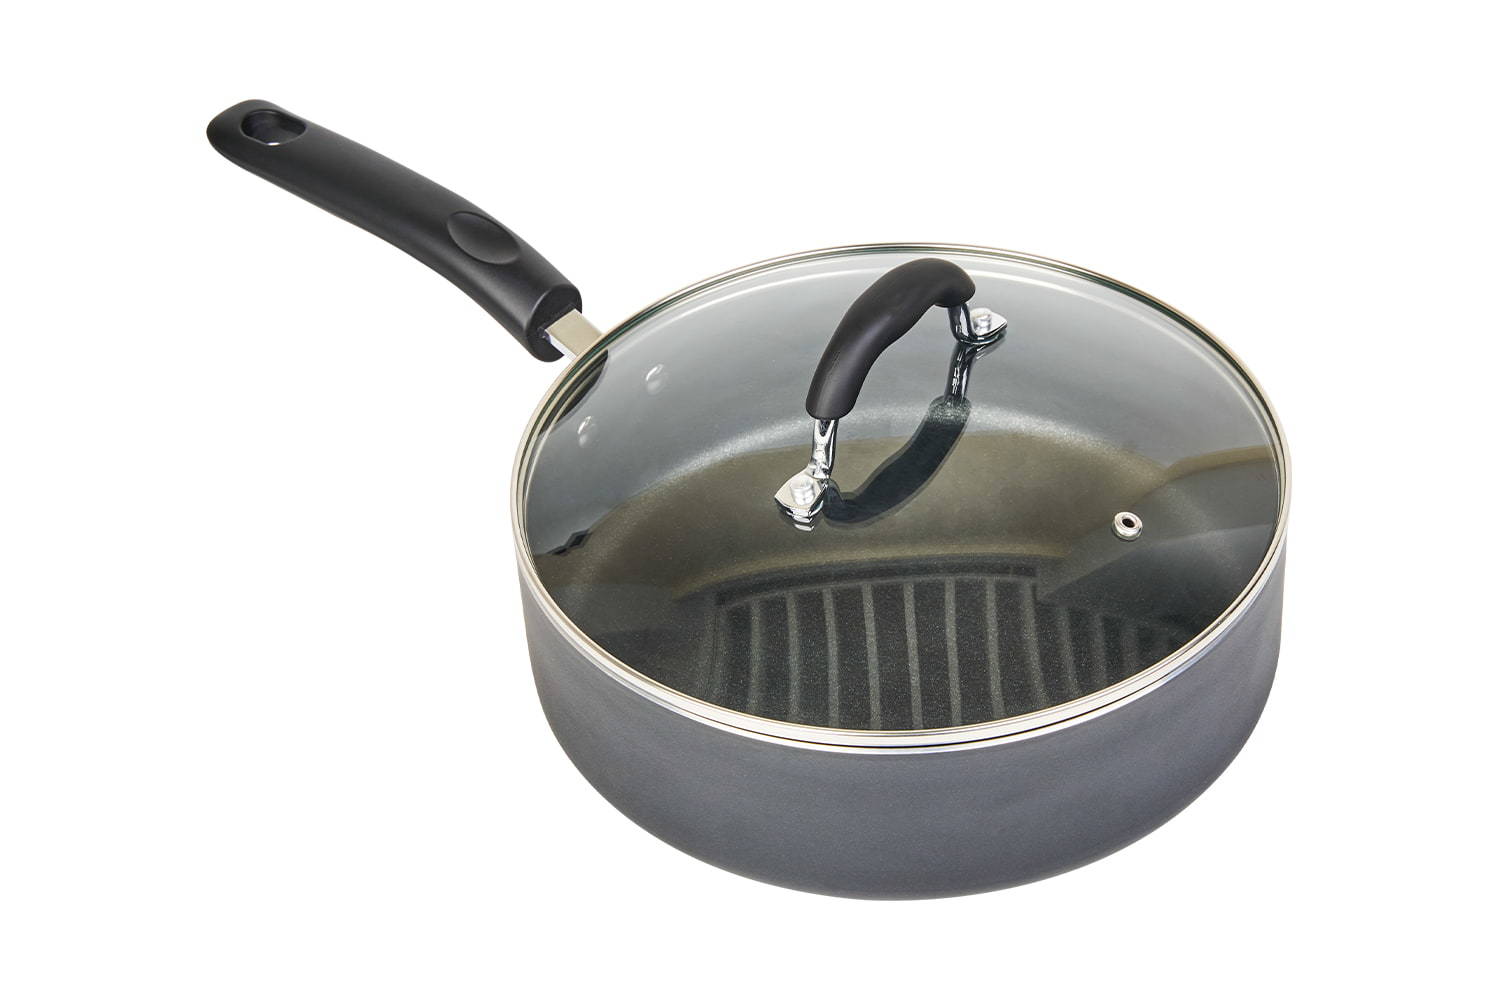 The 26cm Enameled Steel Pot Is a Kitchen Essential